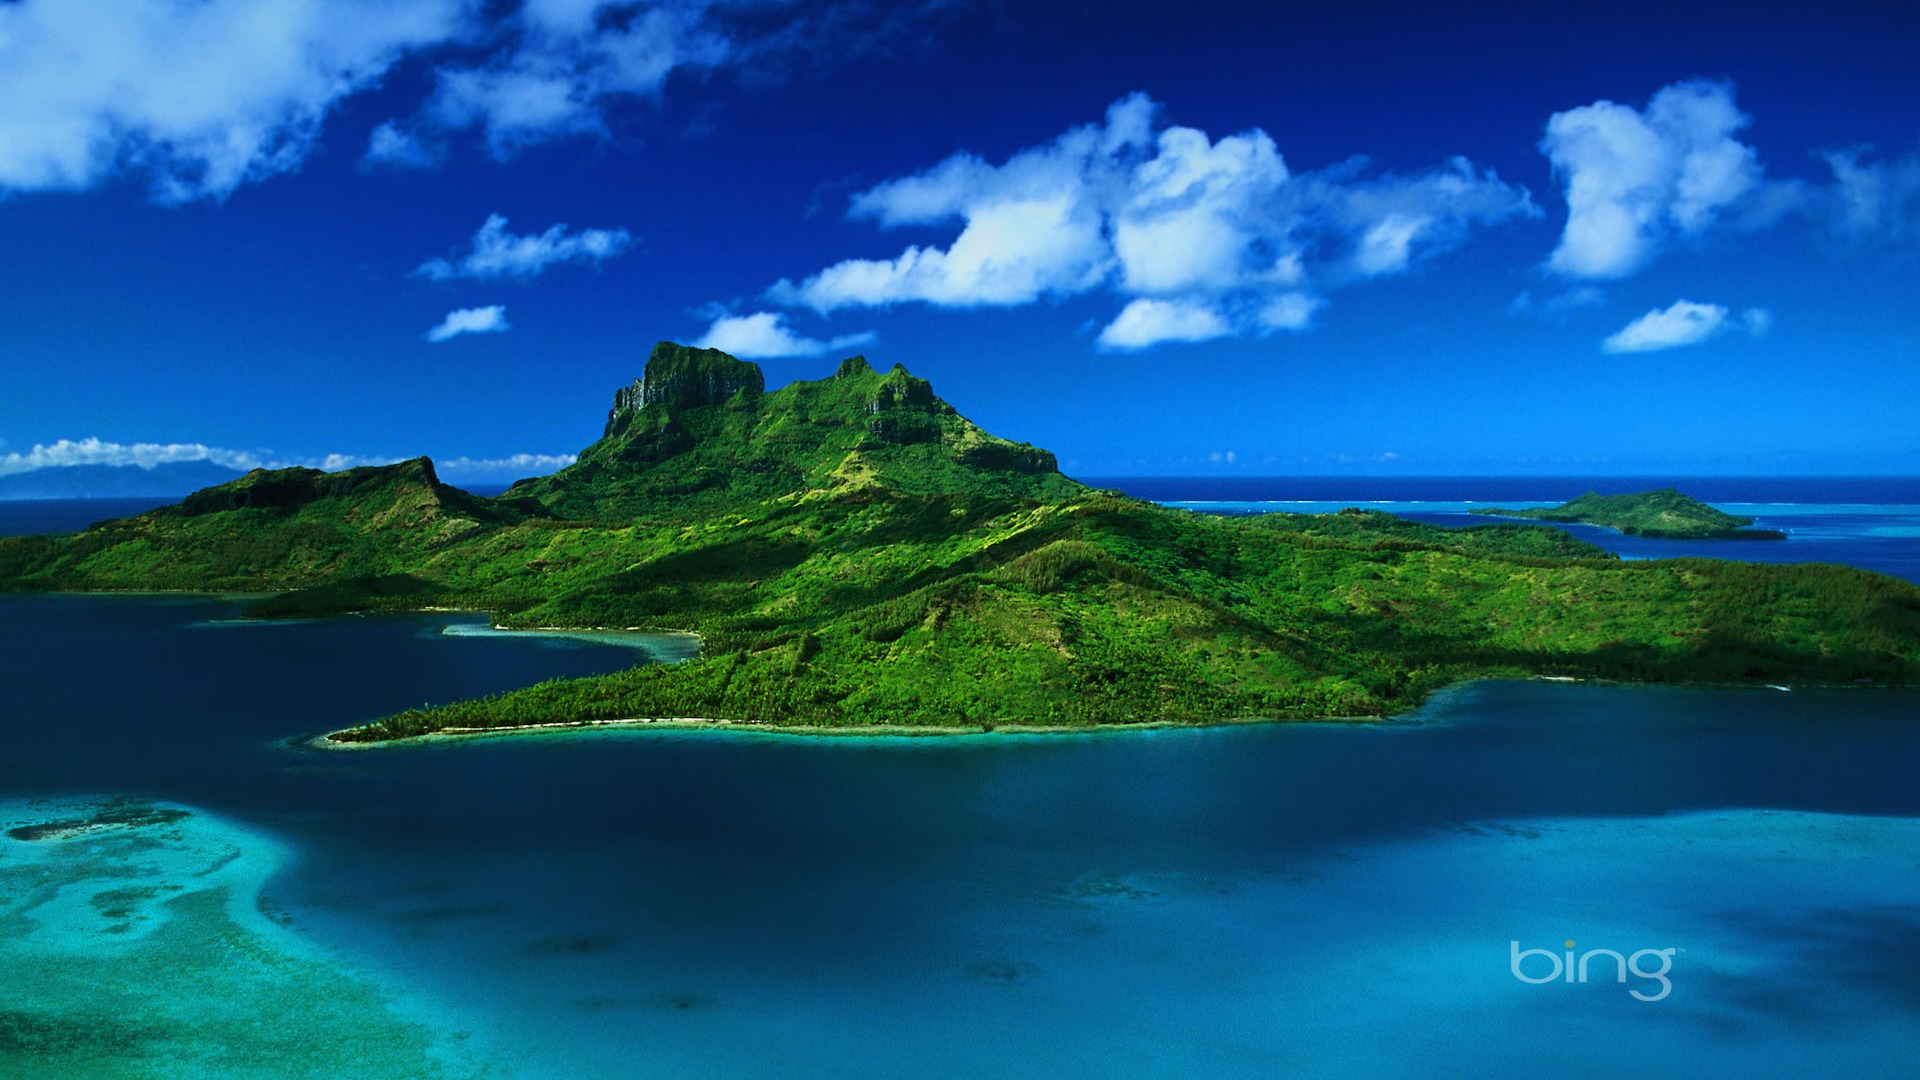 29 Most Beautiful Bing Wallpapers For Android Phones - Landscape Bora Bora , HD Wallpaper & Backgrounds